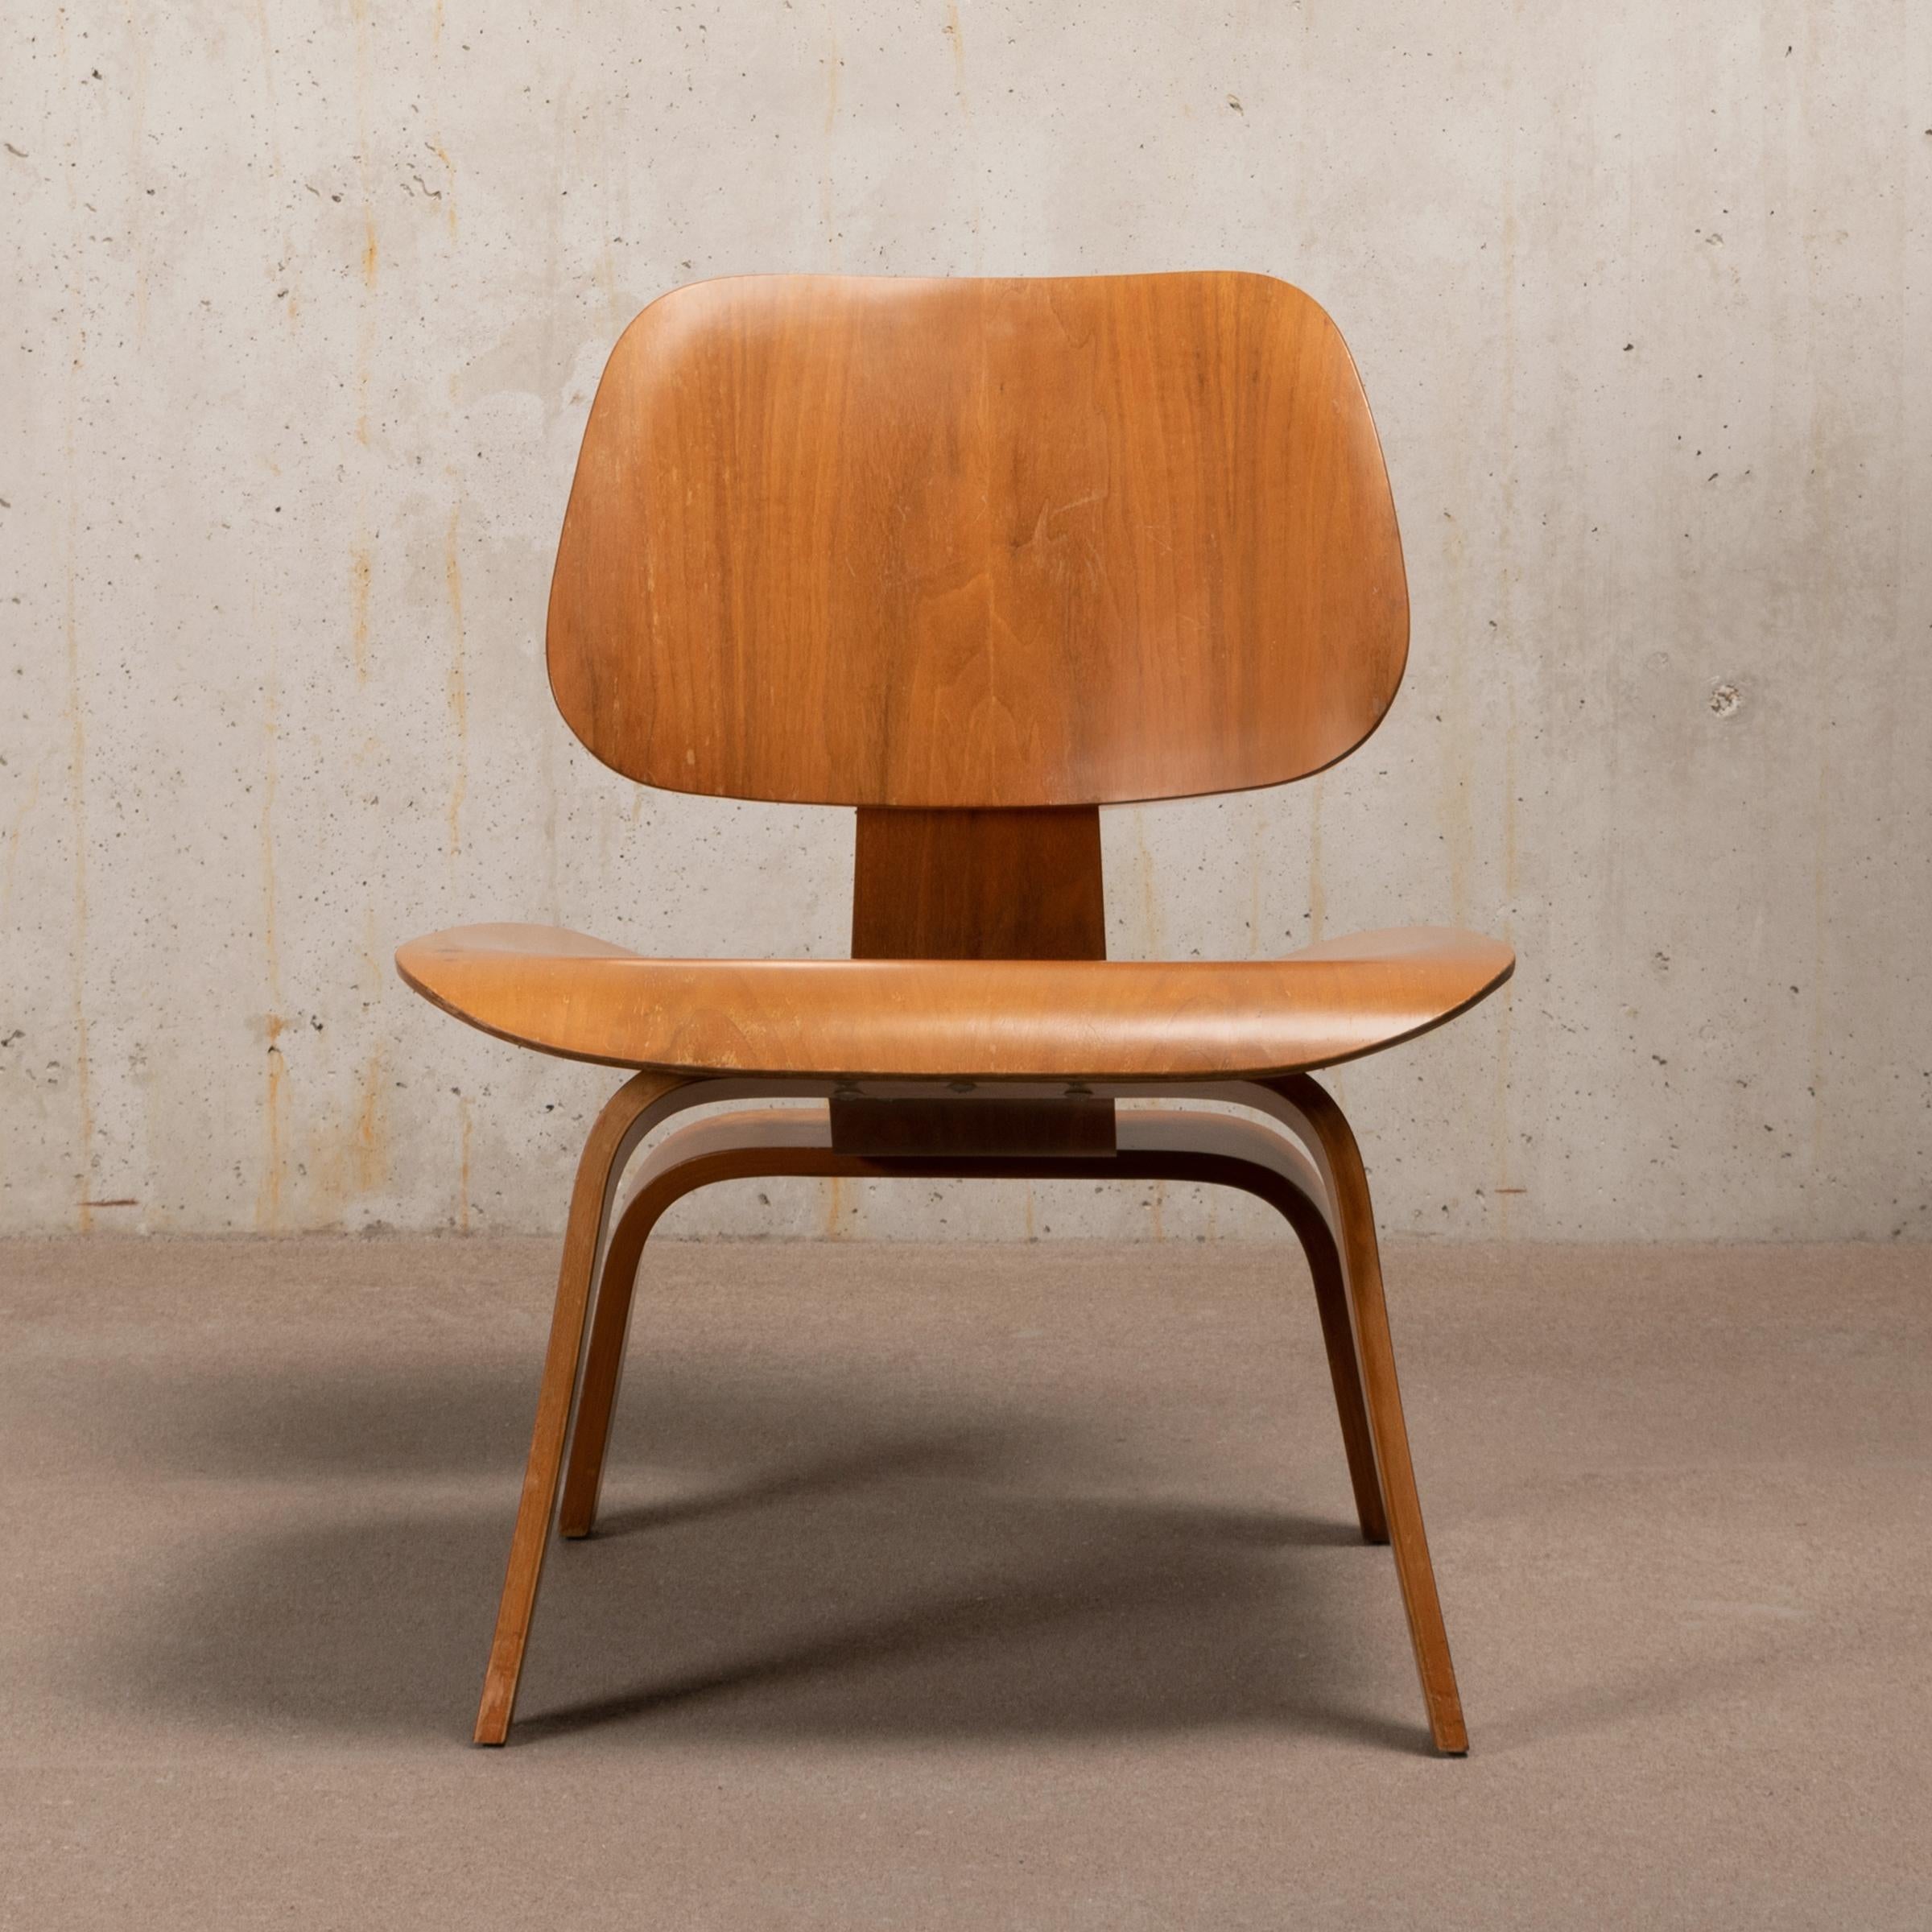 Molded Charles & Ray Eames Early LCW Walnut Lounge Chair for Herman Miller